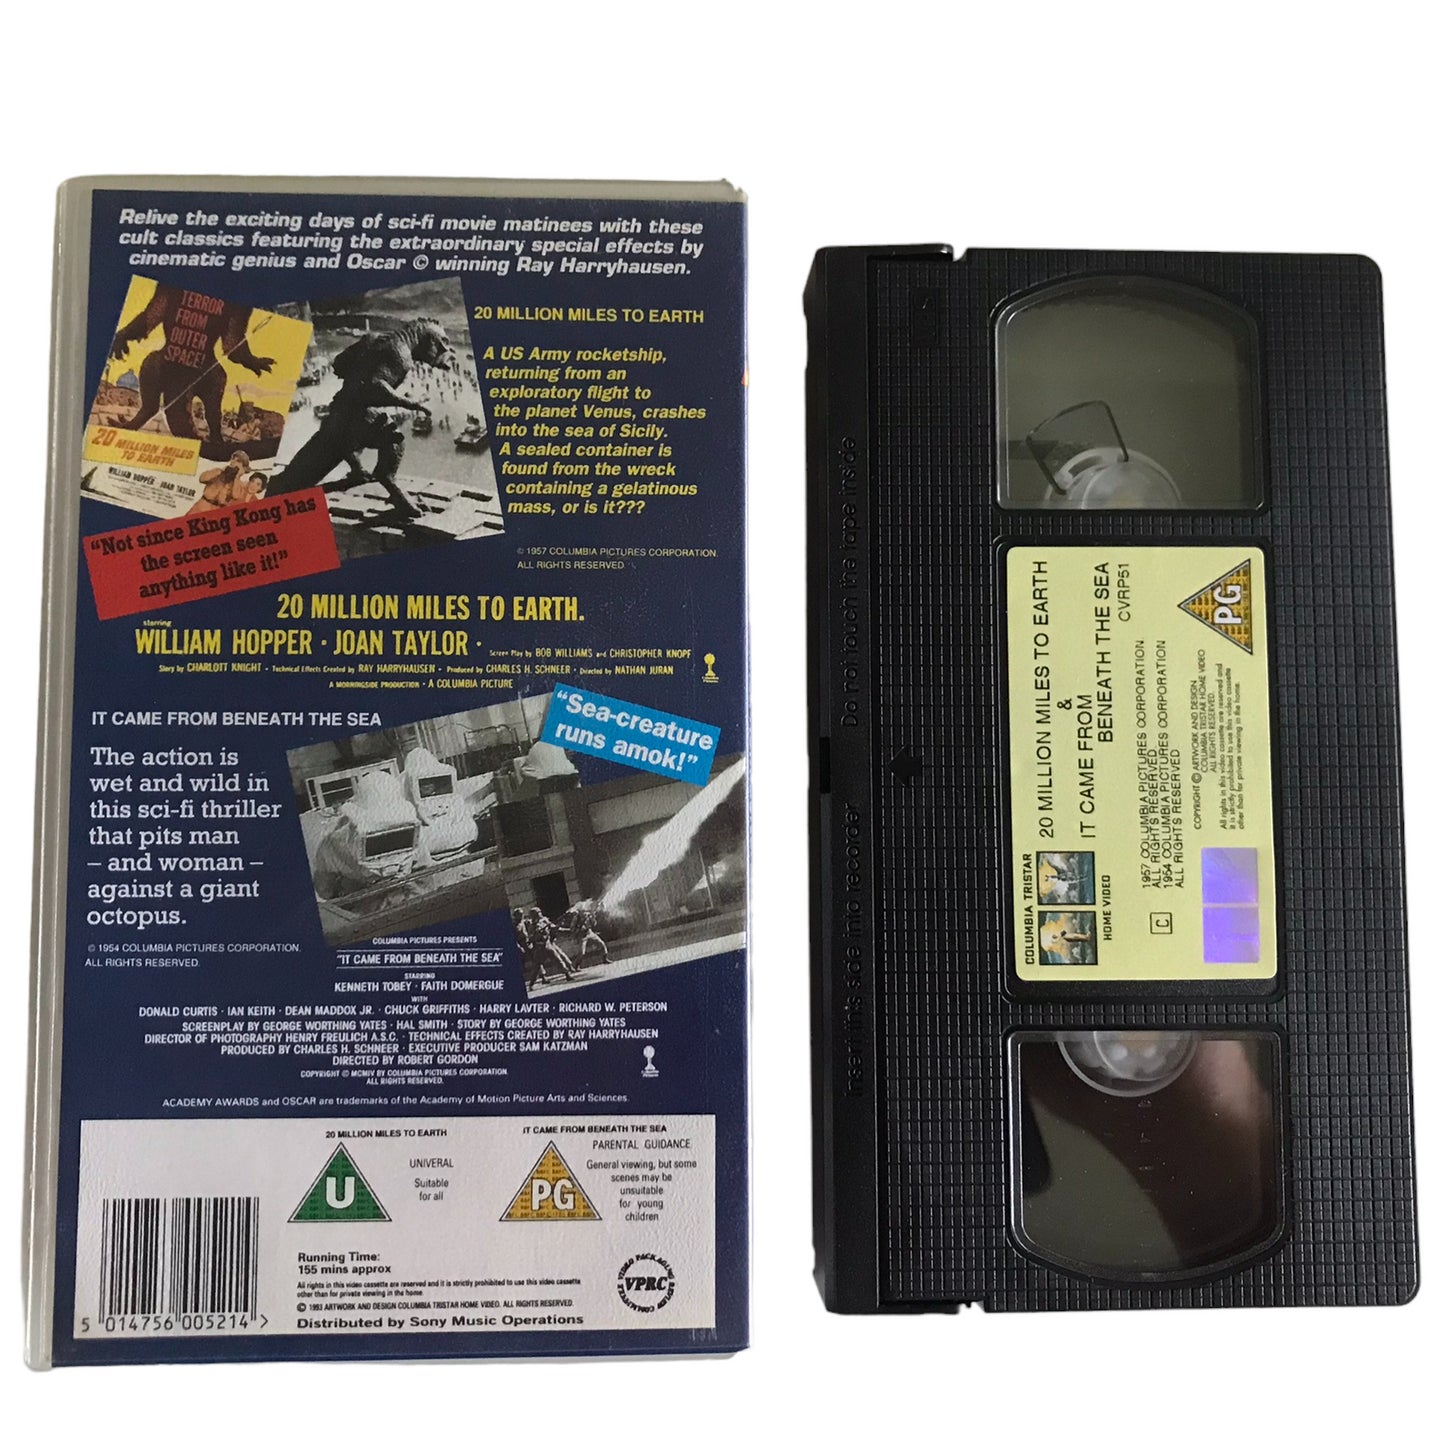 20 Million Miles To Earth & It Came From Benearth The Sea - William Hopper - Sony Music - Horror - Pal - VHS-